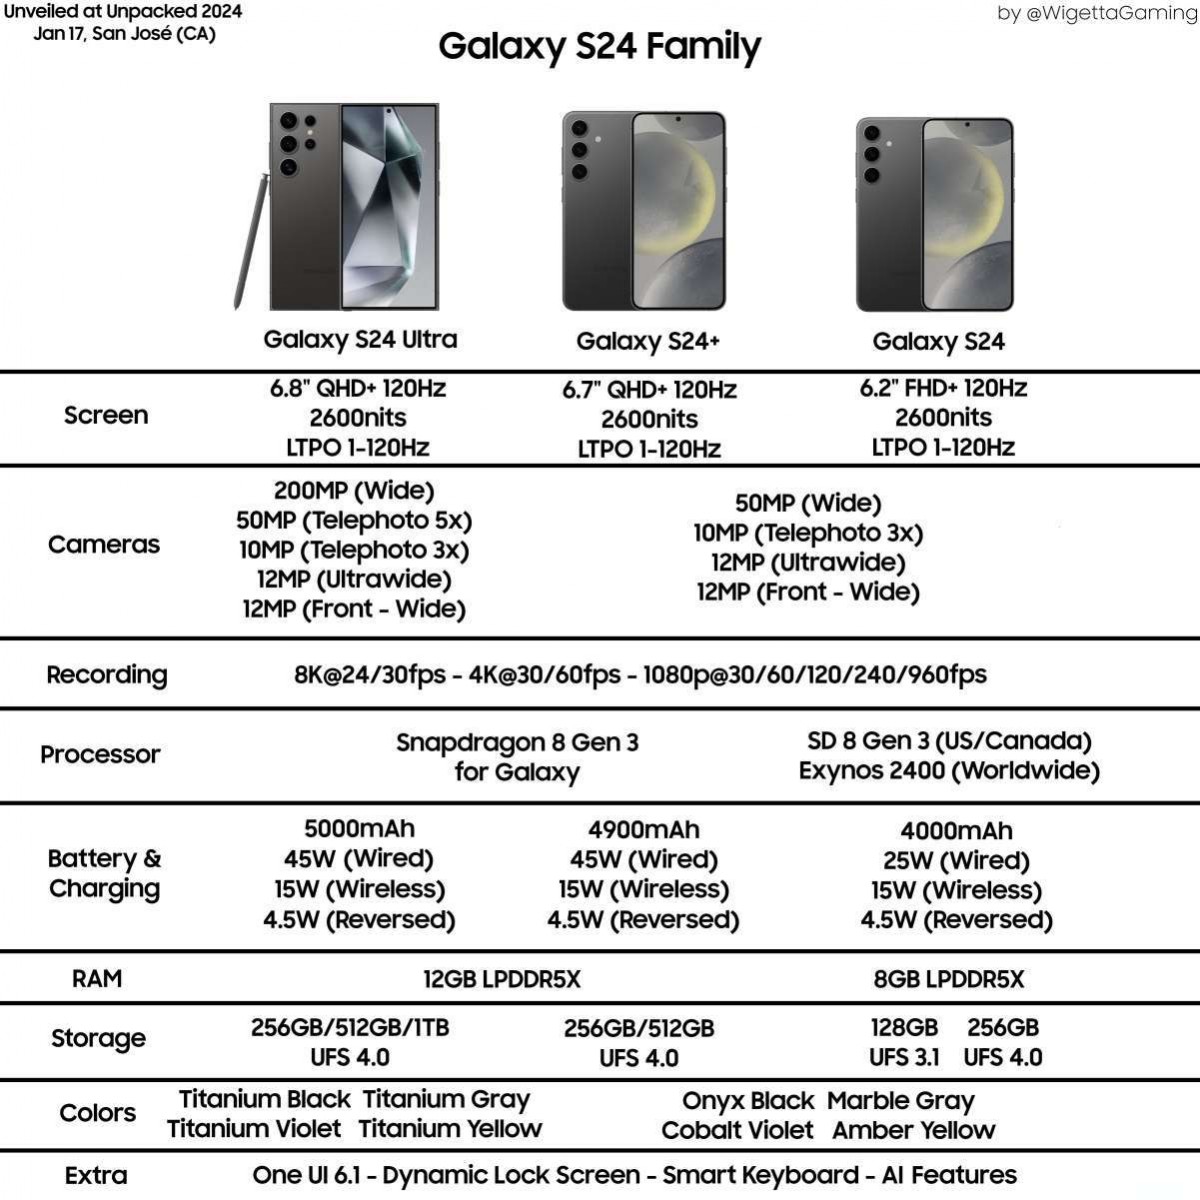 Samsung Galaxy S24 and S24+ - what to expect